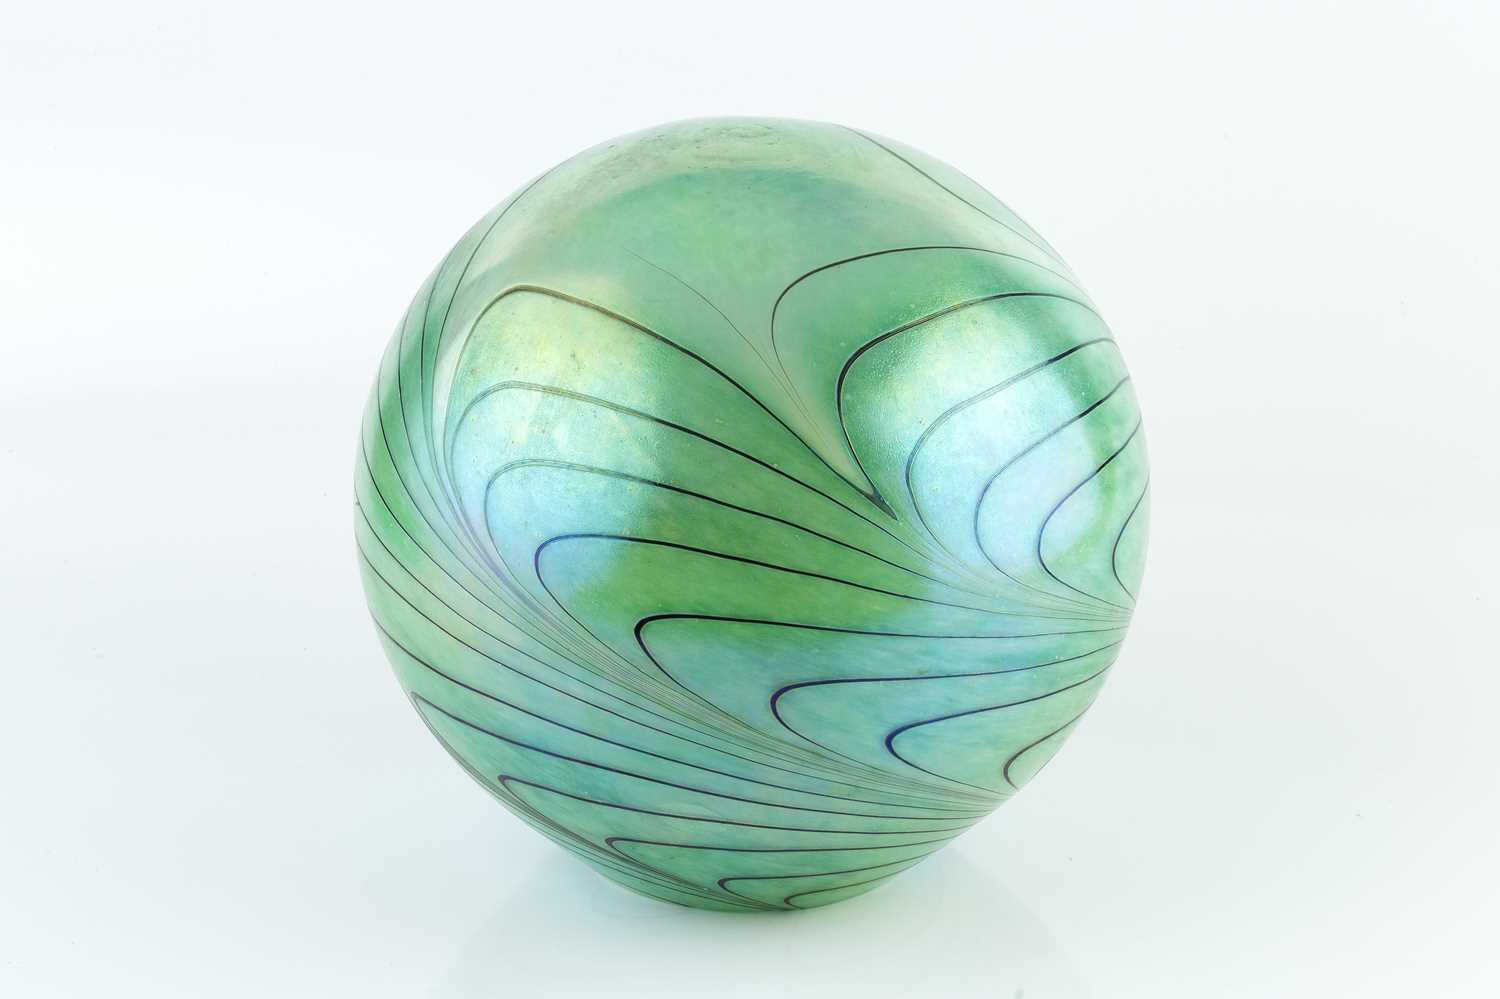 Lino Tagliapietra (b.1934) Art glass table lamp swirled green and white glass with black lines - Image 2 of 3